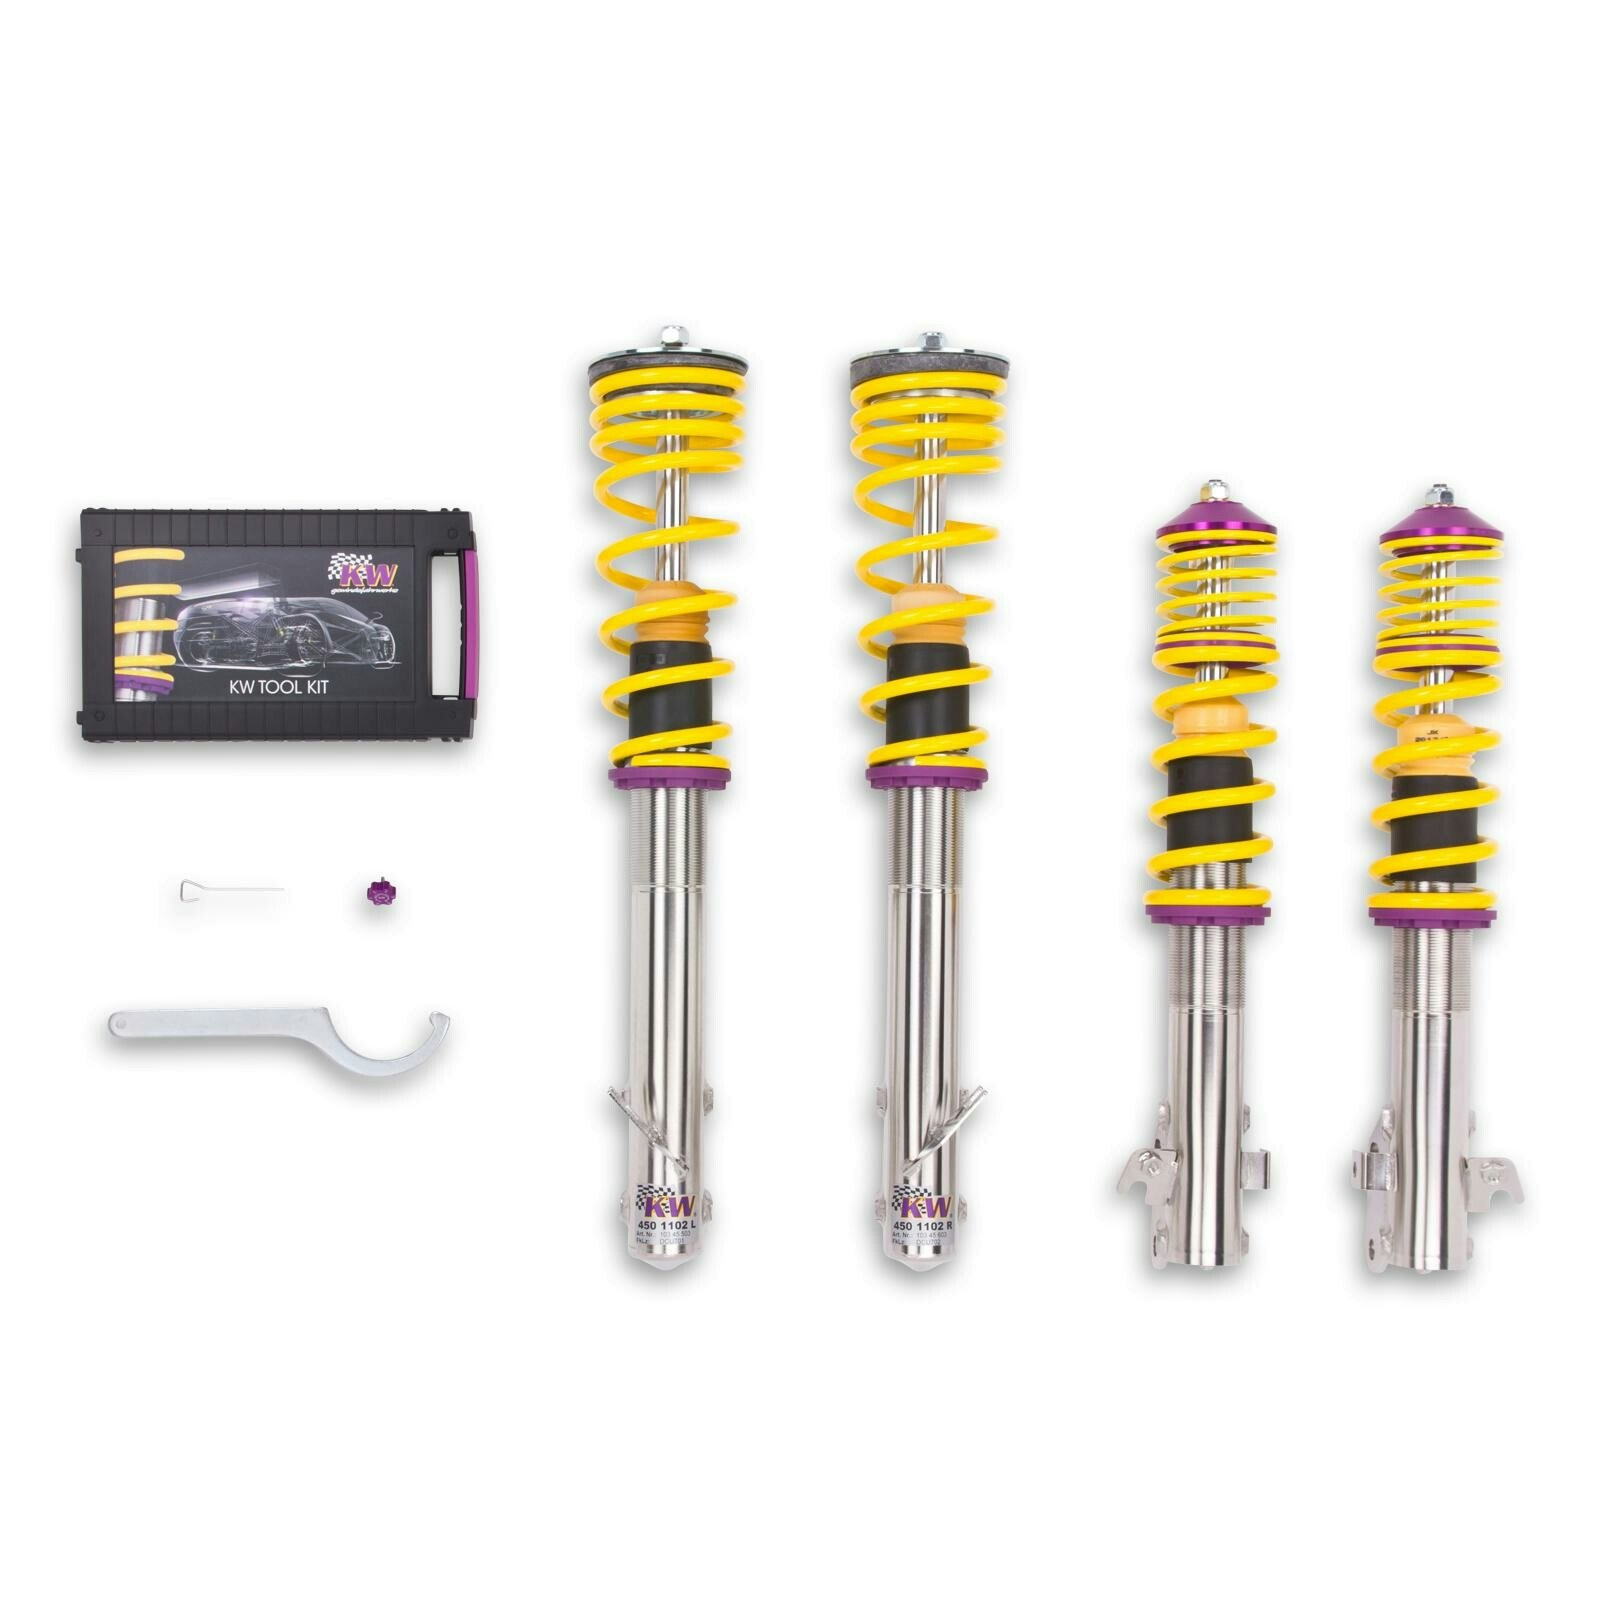 Out now: KW KW V1 and V3 Coilovers for BMW X1 (F48)